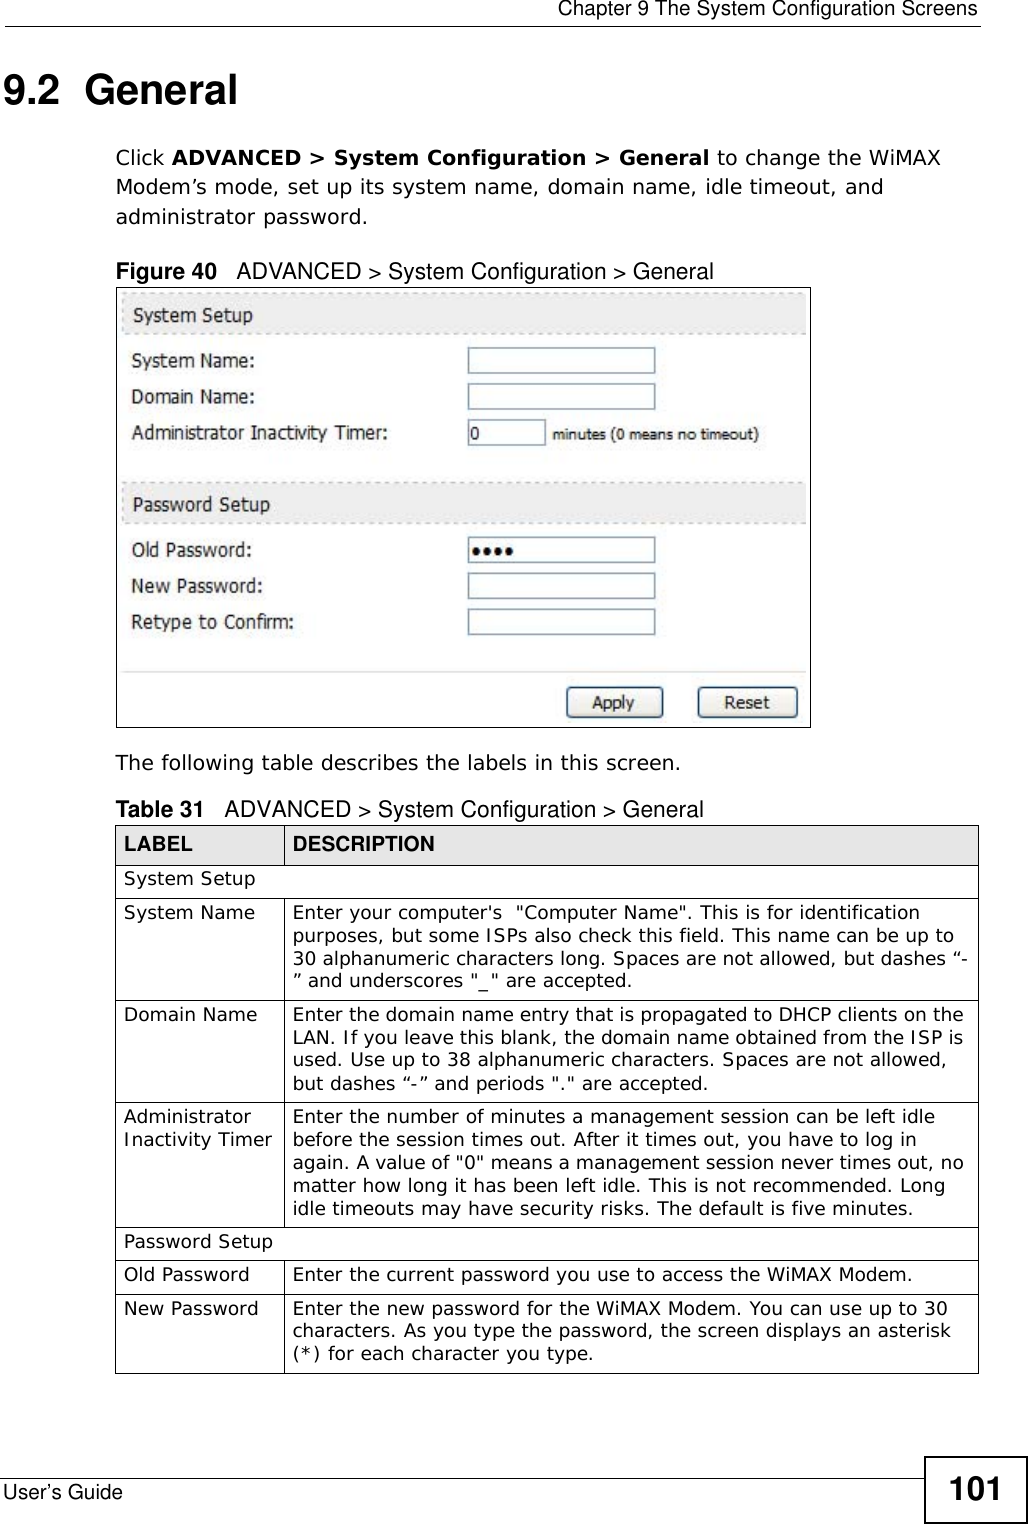  Chapter 9 The System Configuration ScreensUser’s Guide 1019.2  General Click ADVANCED &gt; System Configuration &gt; General to change the WiMAX Modem’s mode, set up its system name, domain name, idle timeout, and administrator password.Figure 40   ADVANCED &gt; System Configuration &gt; GeneralThe following table describes the labels in this screen.Table 31   ADVANCED &gt; System Configuration &gt; GeneralLABEL DESCRIPTIONSystem SetupSystem Name Enter your computer&apos;s  &quot;Computer Name&quot;. This is for identification purposes, but some ISPs also check this field. This name can be up to 30 alphanumeric characters long. Spaces are not allowed, but dashes “-” and underscores &quot;_&quot; are accepted.Domain Name Enter the domain name entry that is propagated to DHCP clients on the LAN. If you leave this blank, the domain name obtained from the ISP is used. Use up to 38 alphanumeric characters. Spaces are not allowed, but dashes “-” and periods &quot;.&quot; are accepted.Administrator Inactivity Timer Enter the number of minutes a management session can be left idle before the session times out. After it times out, you have to log in again. A value of &quot;0&quot; means a management session never times out, no matter how long it has been left idle. This is not recommended. Long idle timeouts may have security risks. The default is five minutes. Password SetupOld Password Enter the current password you use to access the WiMAX Modem.New Password Enter the new password for the WiMAX Modem. You can use up to 30 characters. As you type the password, the screen displays an asterisk (*) for each character you type.